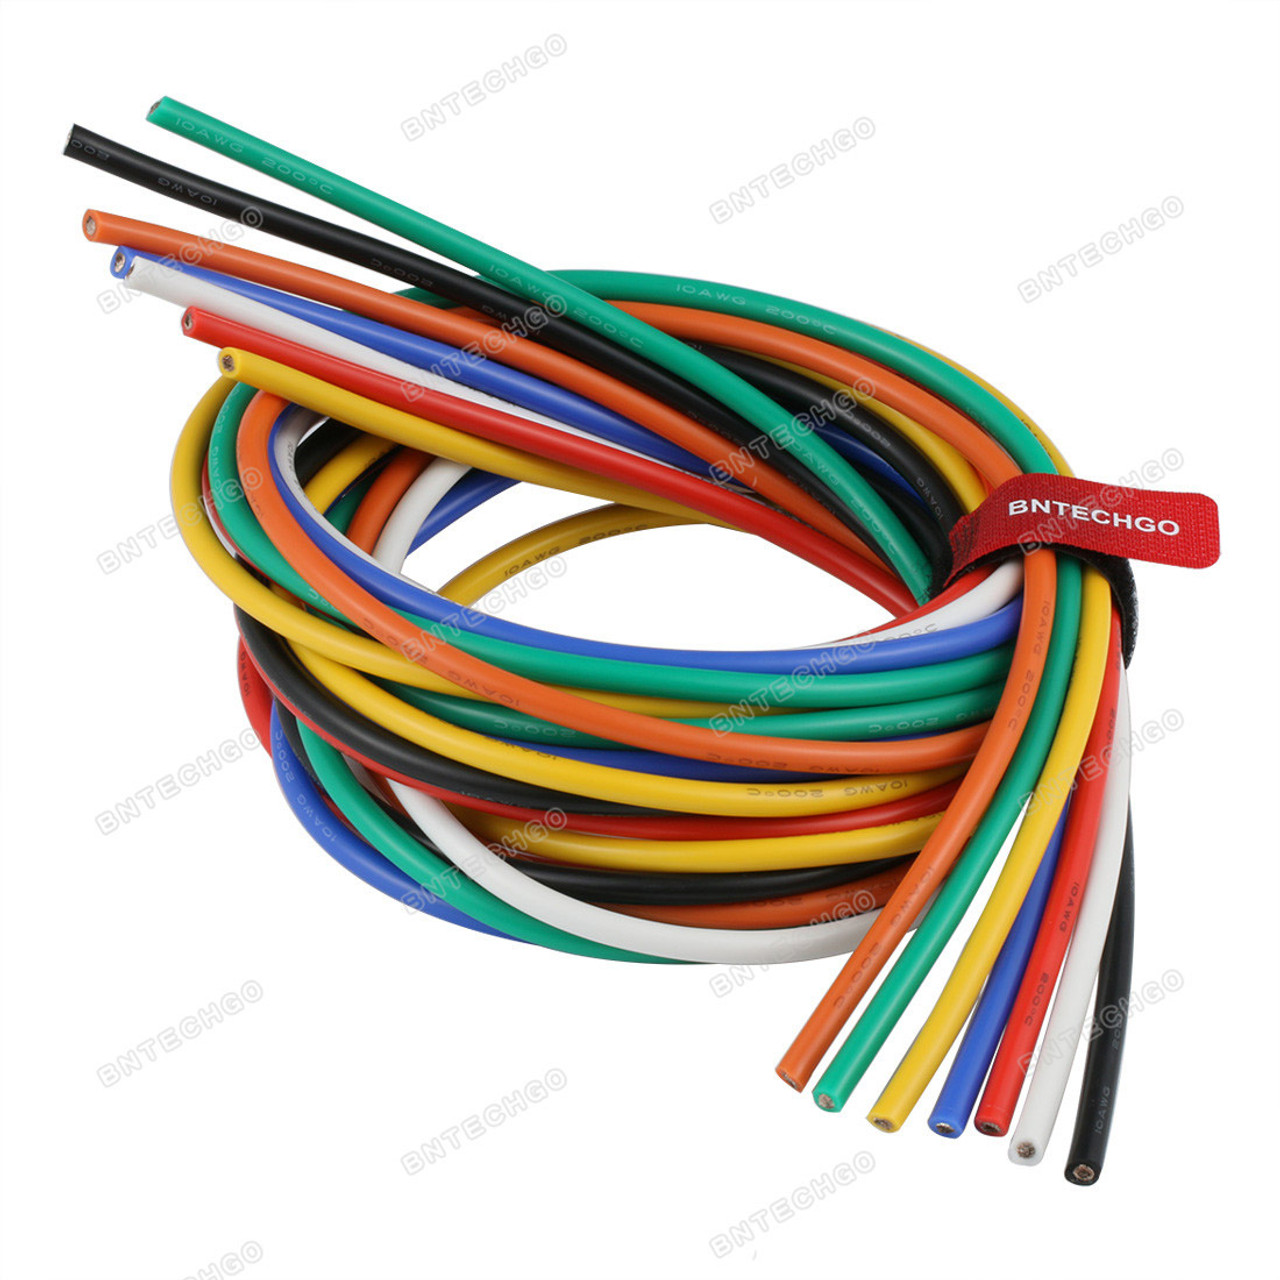 BNTECHGO 10 Gauge Silicone Wire Kit 7 Color Each 3 ft Flexible 10 AWG  Stranded Tinned Copper Wire